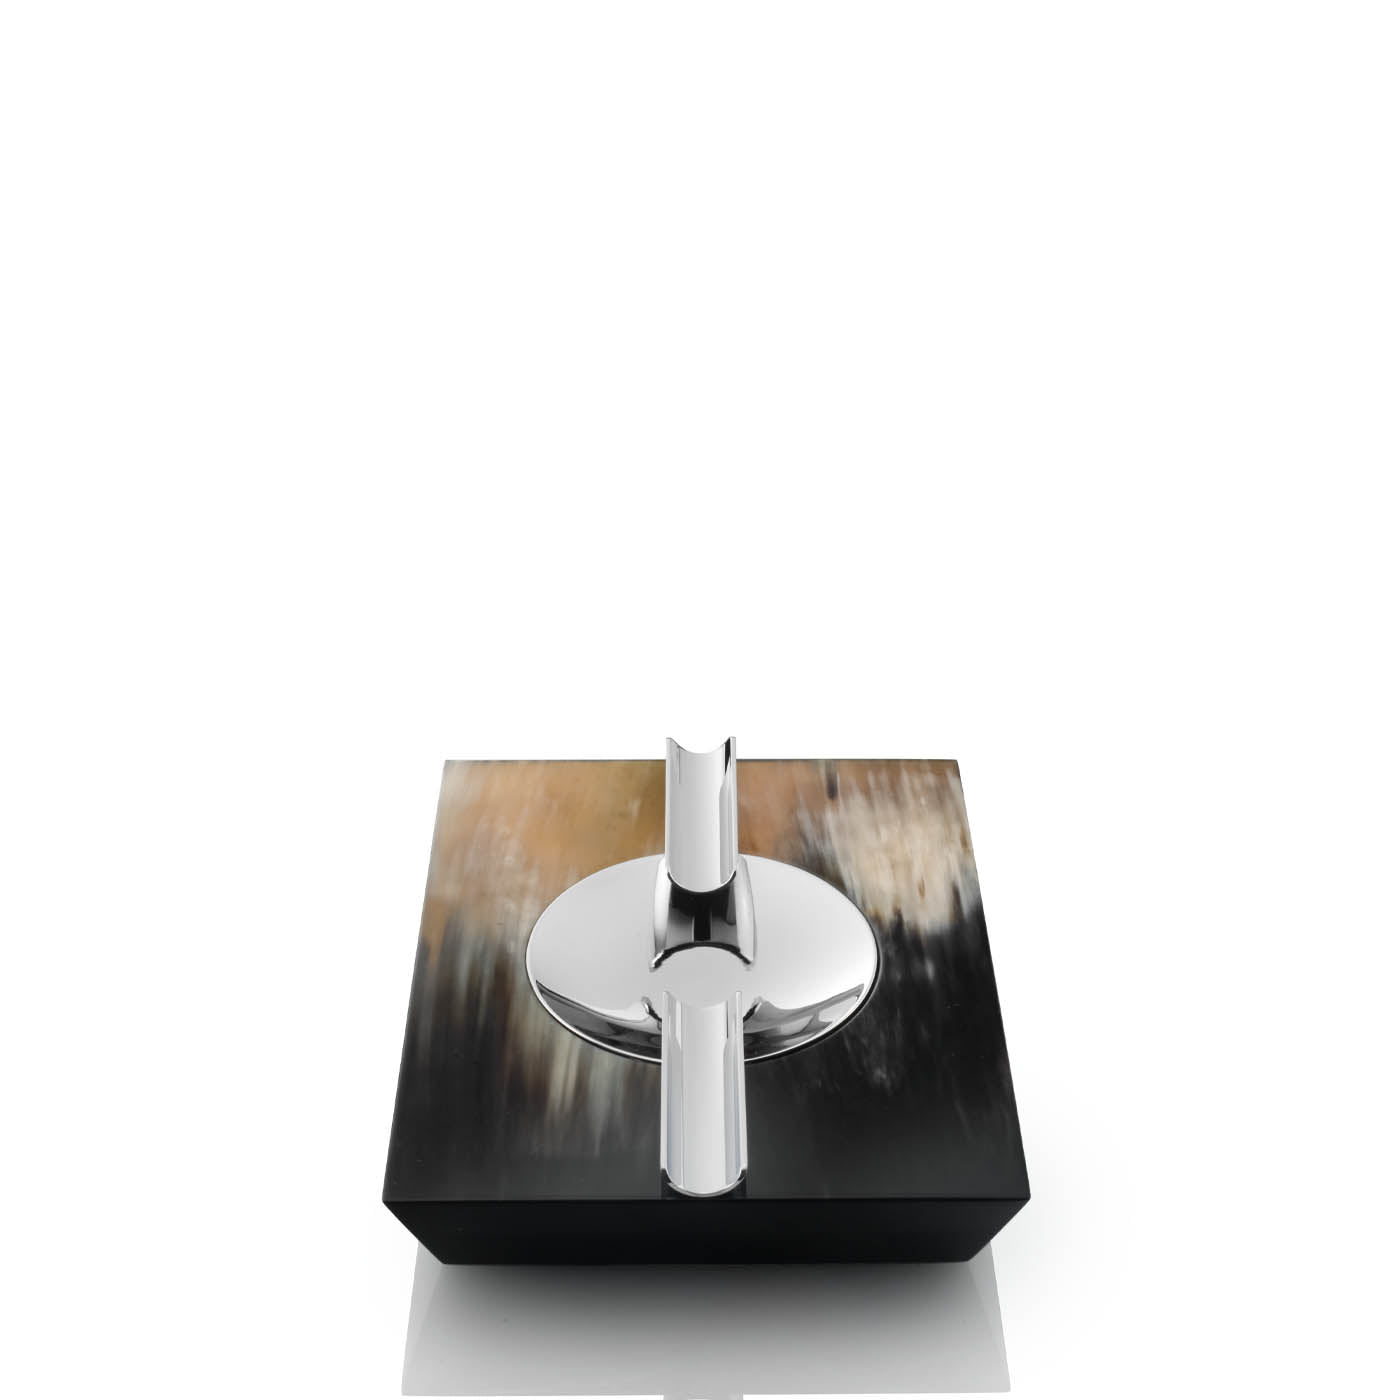 BACCO - Ash tray and lighter in dark horn, wood with lacquered black gloss finish and chromed brass. - LAZADO